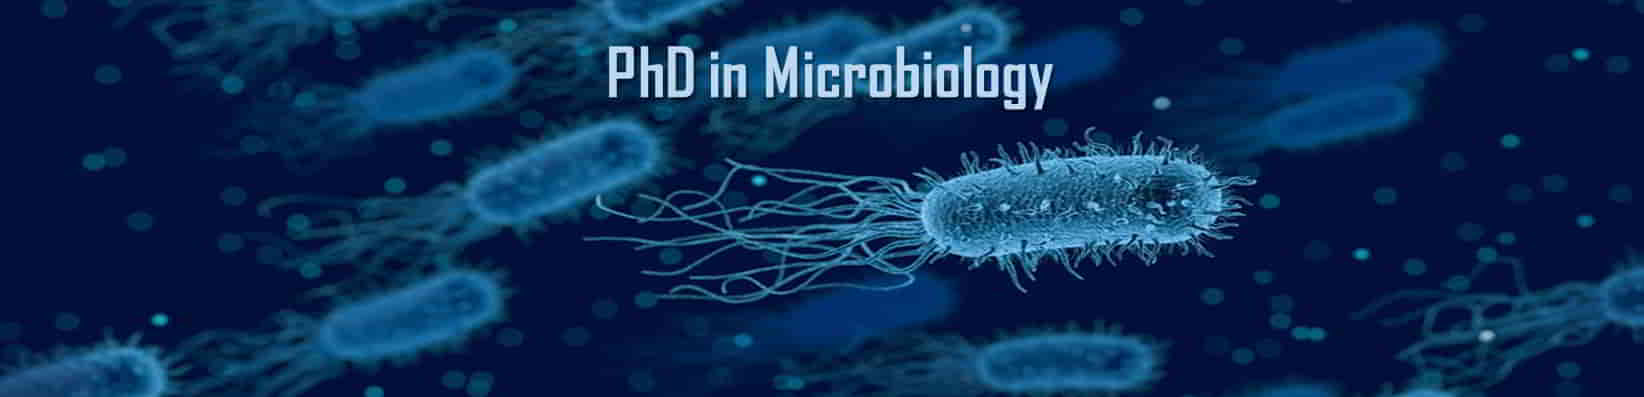 phd scholarships in microbiology